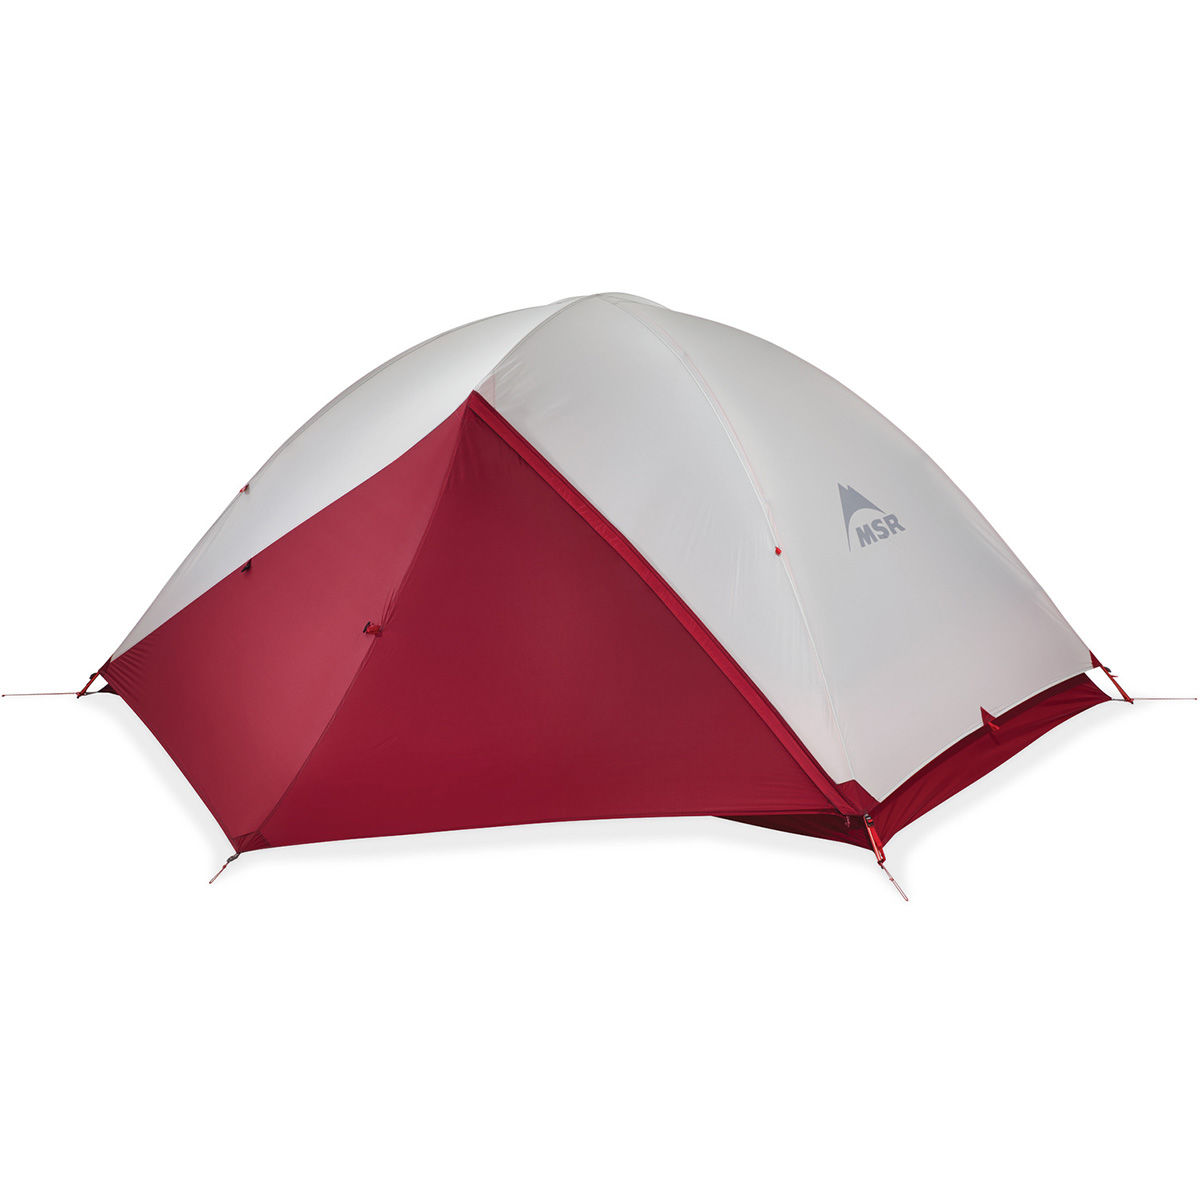 msr-zoic-2-backpacking-tent-2-people-gre